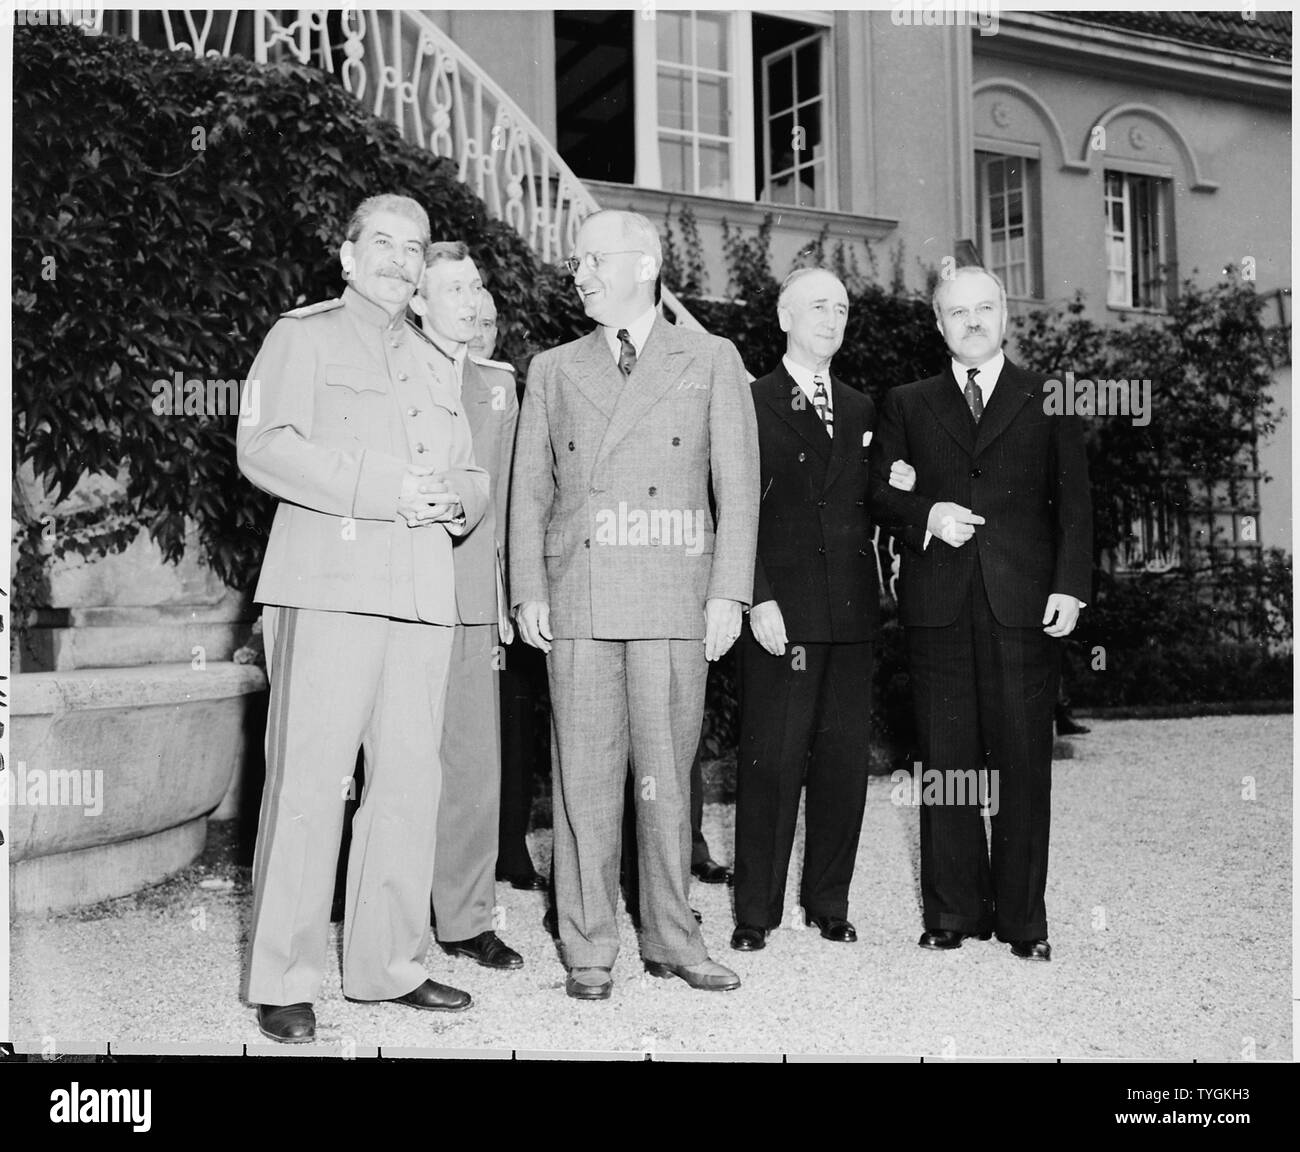 President Truman and Soviet Union Prime Minister Josef Stalin on the lawn in front of Prime Minister Stalin's residence during the Potsdam Conference, Potsdam, Germany. L to R: Prime Minister Josef Stalin, V. N. Pavlov, interpreter for Prime Minister Stalin, President Harry S. Truman, Secretary of State James Byrnes, and Soviet foreign minister Vyacheslav Molotov. Stock Photo